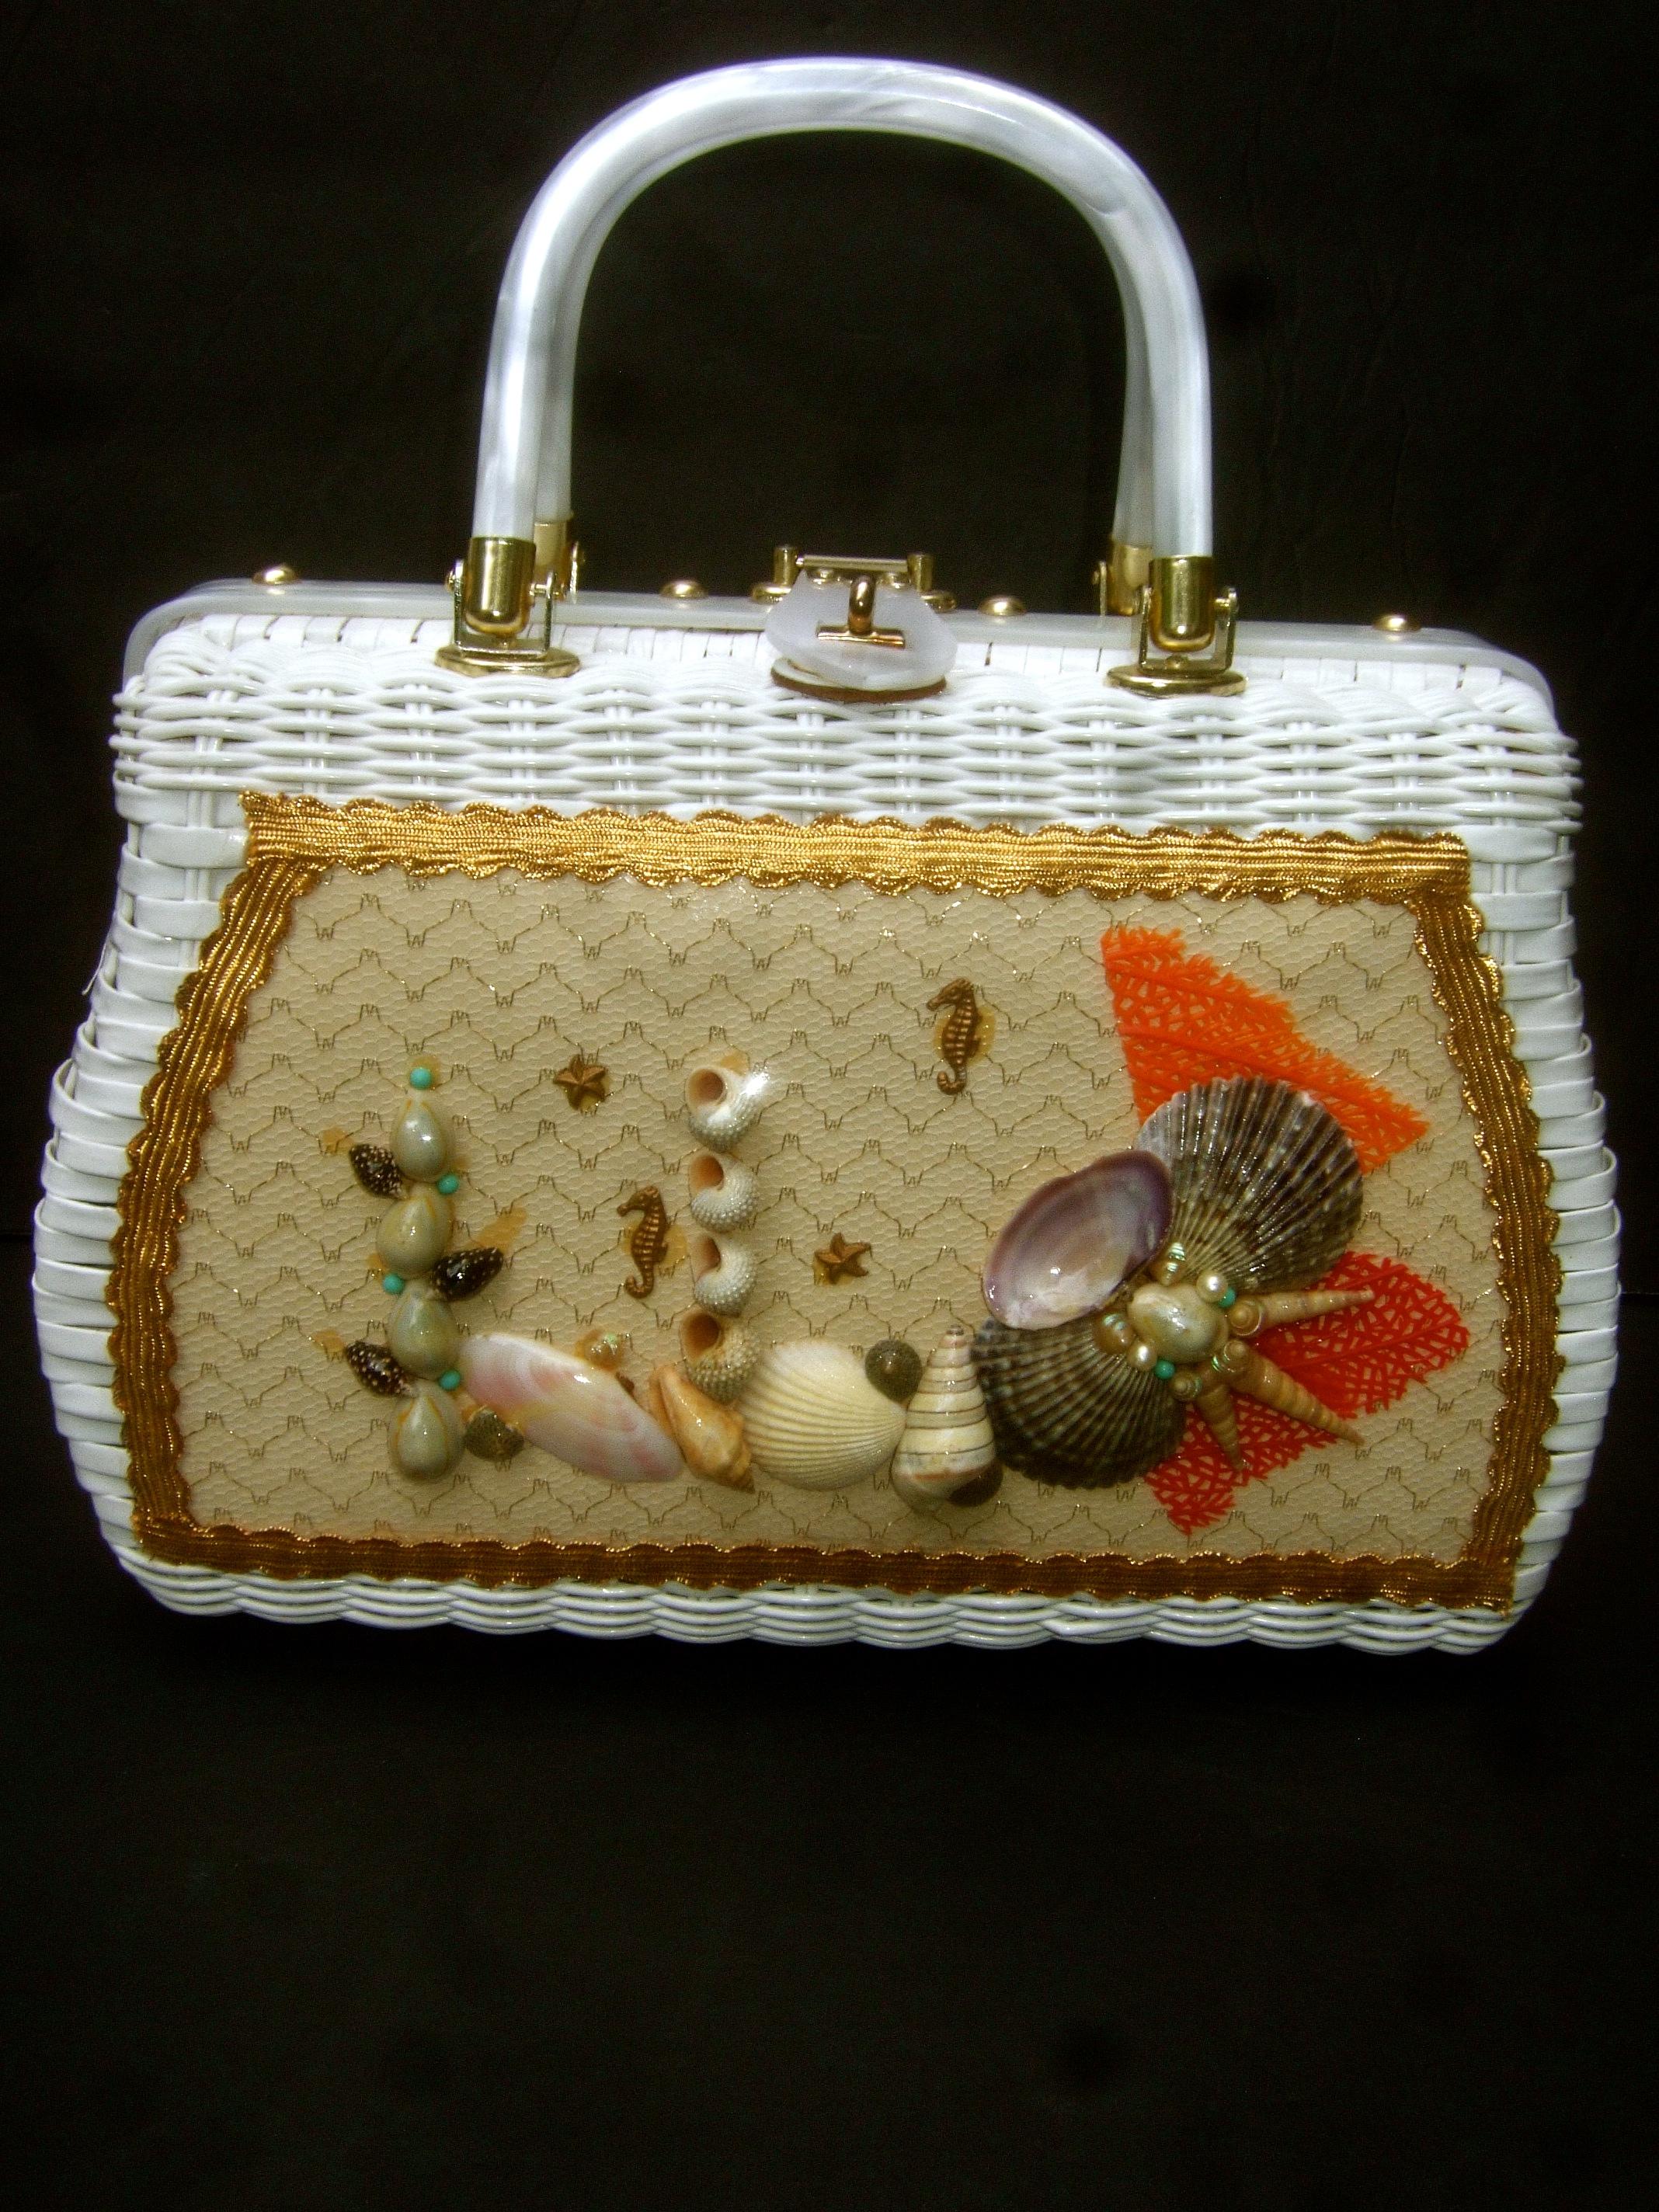 1970s Crisp white wicker sea life coastal handbag 
The charming woven white vinyl wicker handbag is embellished with a collection of organic seashells, faux seahorse figures and faux coral branches encased in a clear vinyl window on the front